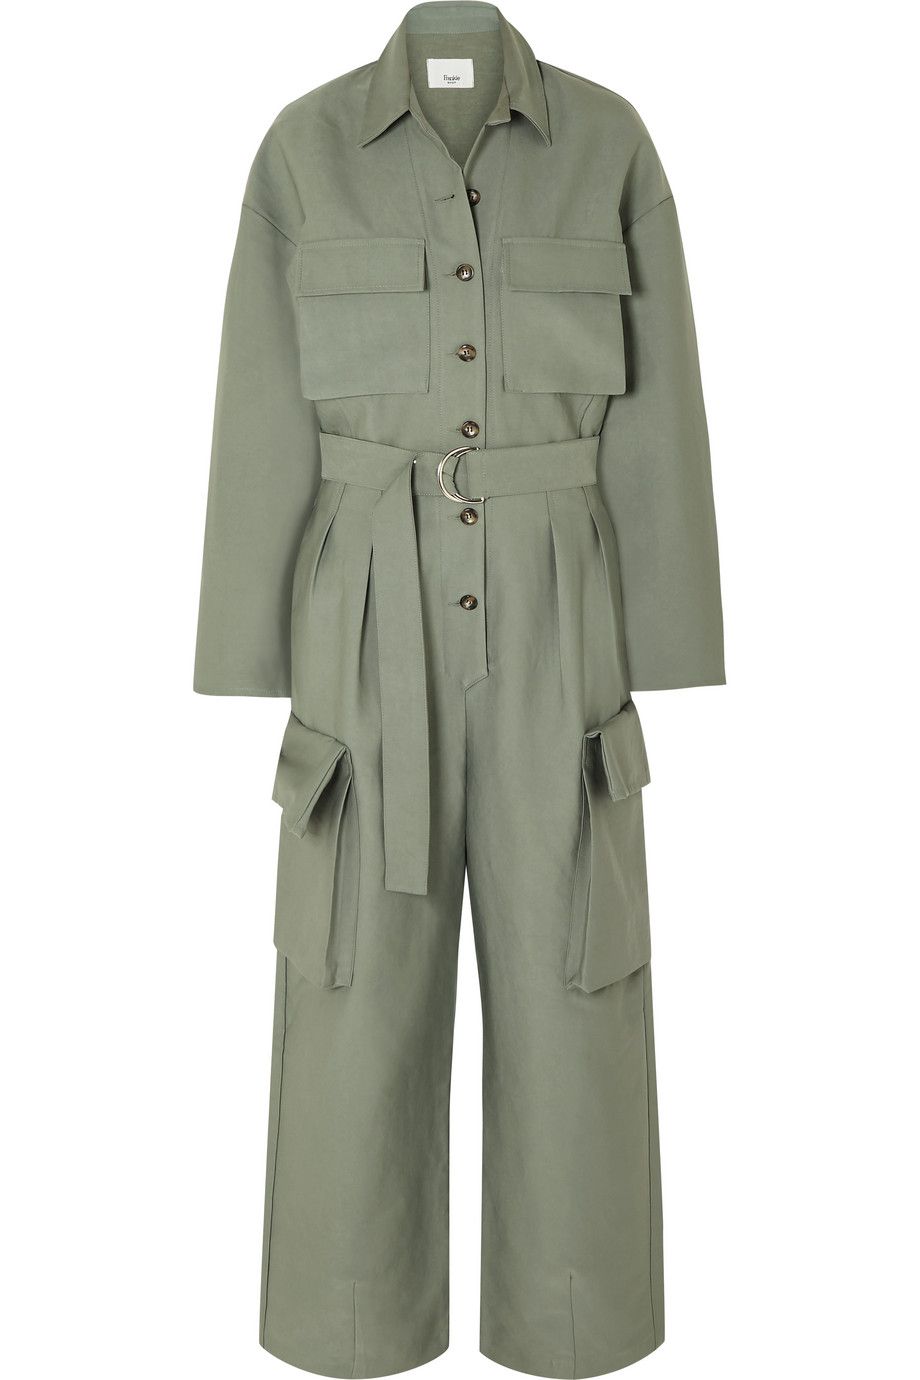 The Frankie Shop's cult boilersuit is finally available in the UK